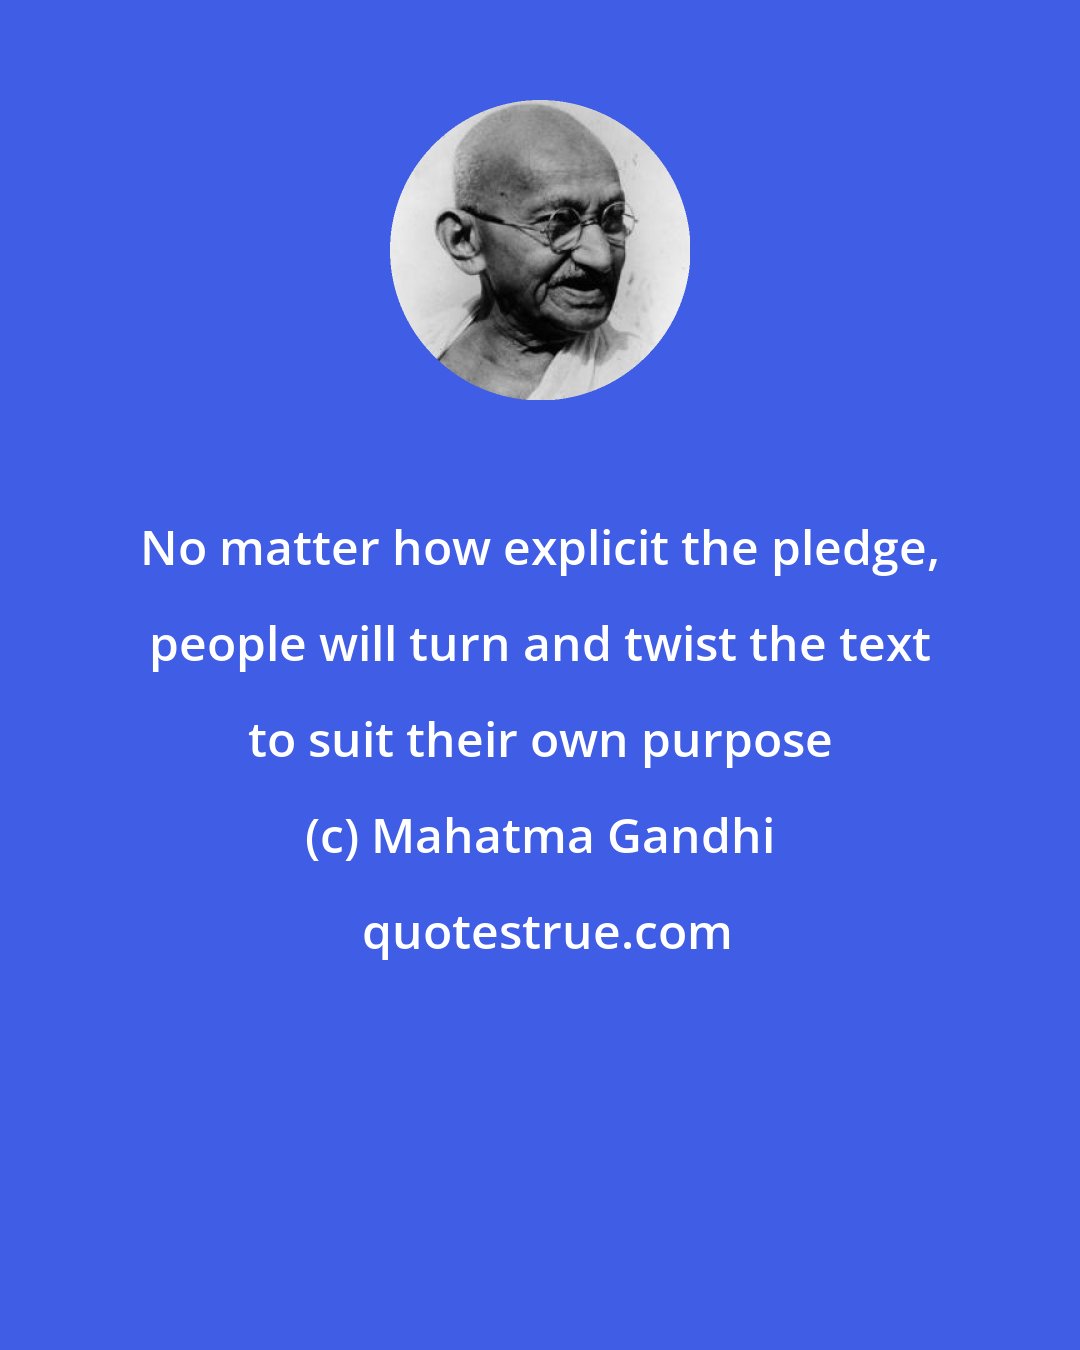 Mahatma Gandhi: No matter how explicit the pledge, people will turn and twist the text to suit their own purpose